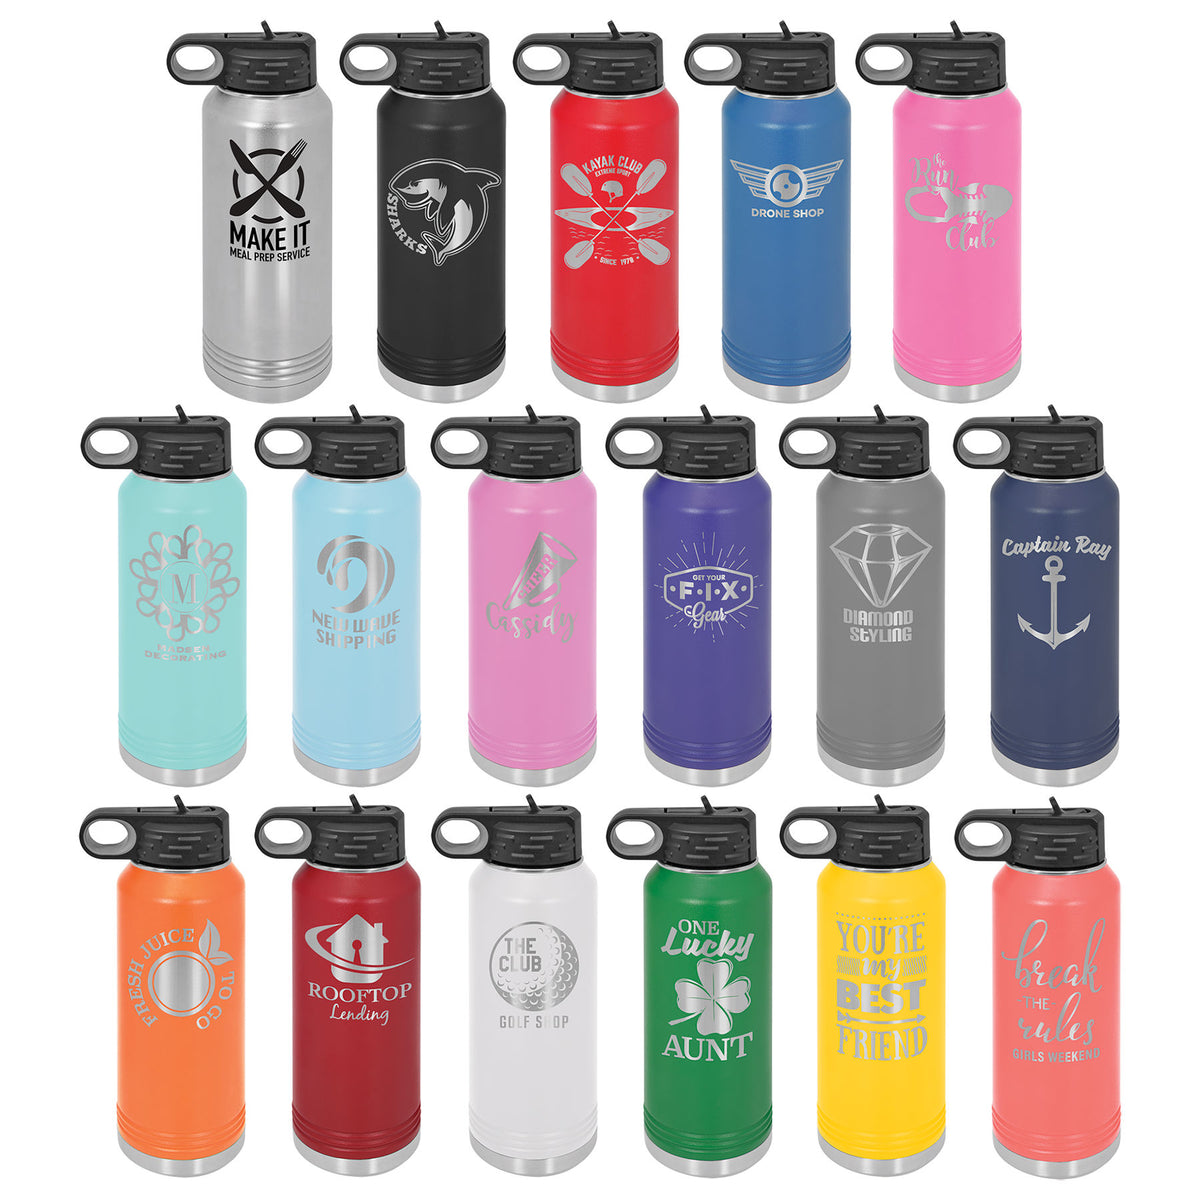 LaserGram 12oz Double Wall Flip Top Water Bottle With Straw, Jet Airplane,  Personalized Engraving Included (Navy Blue)